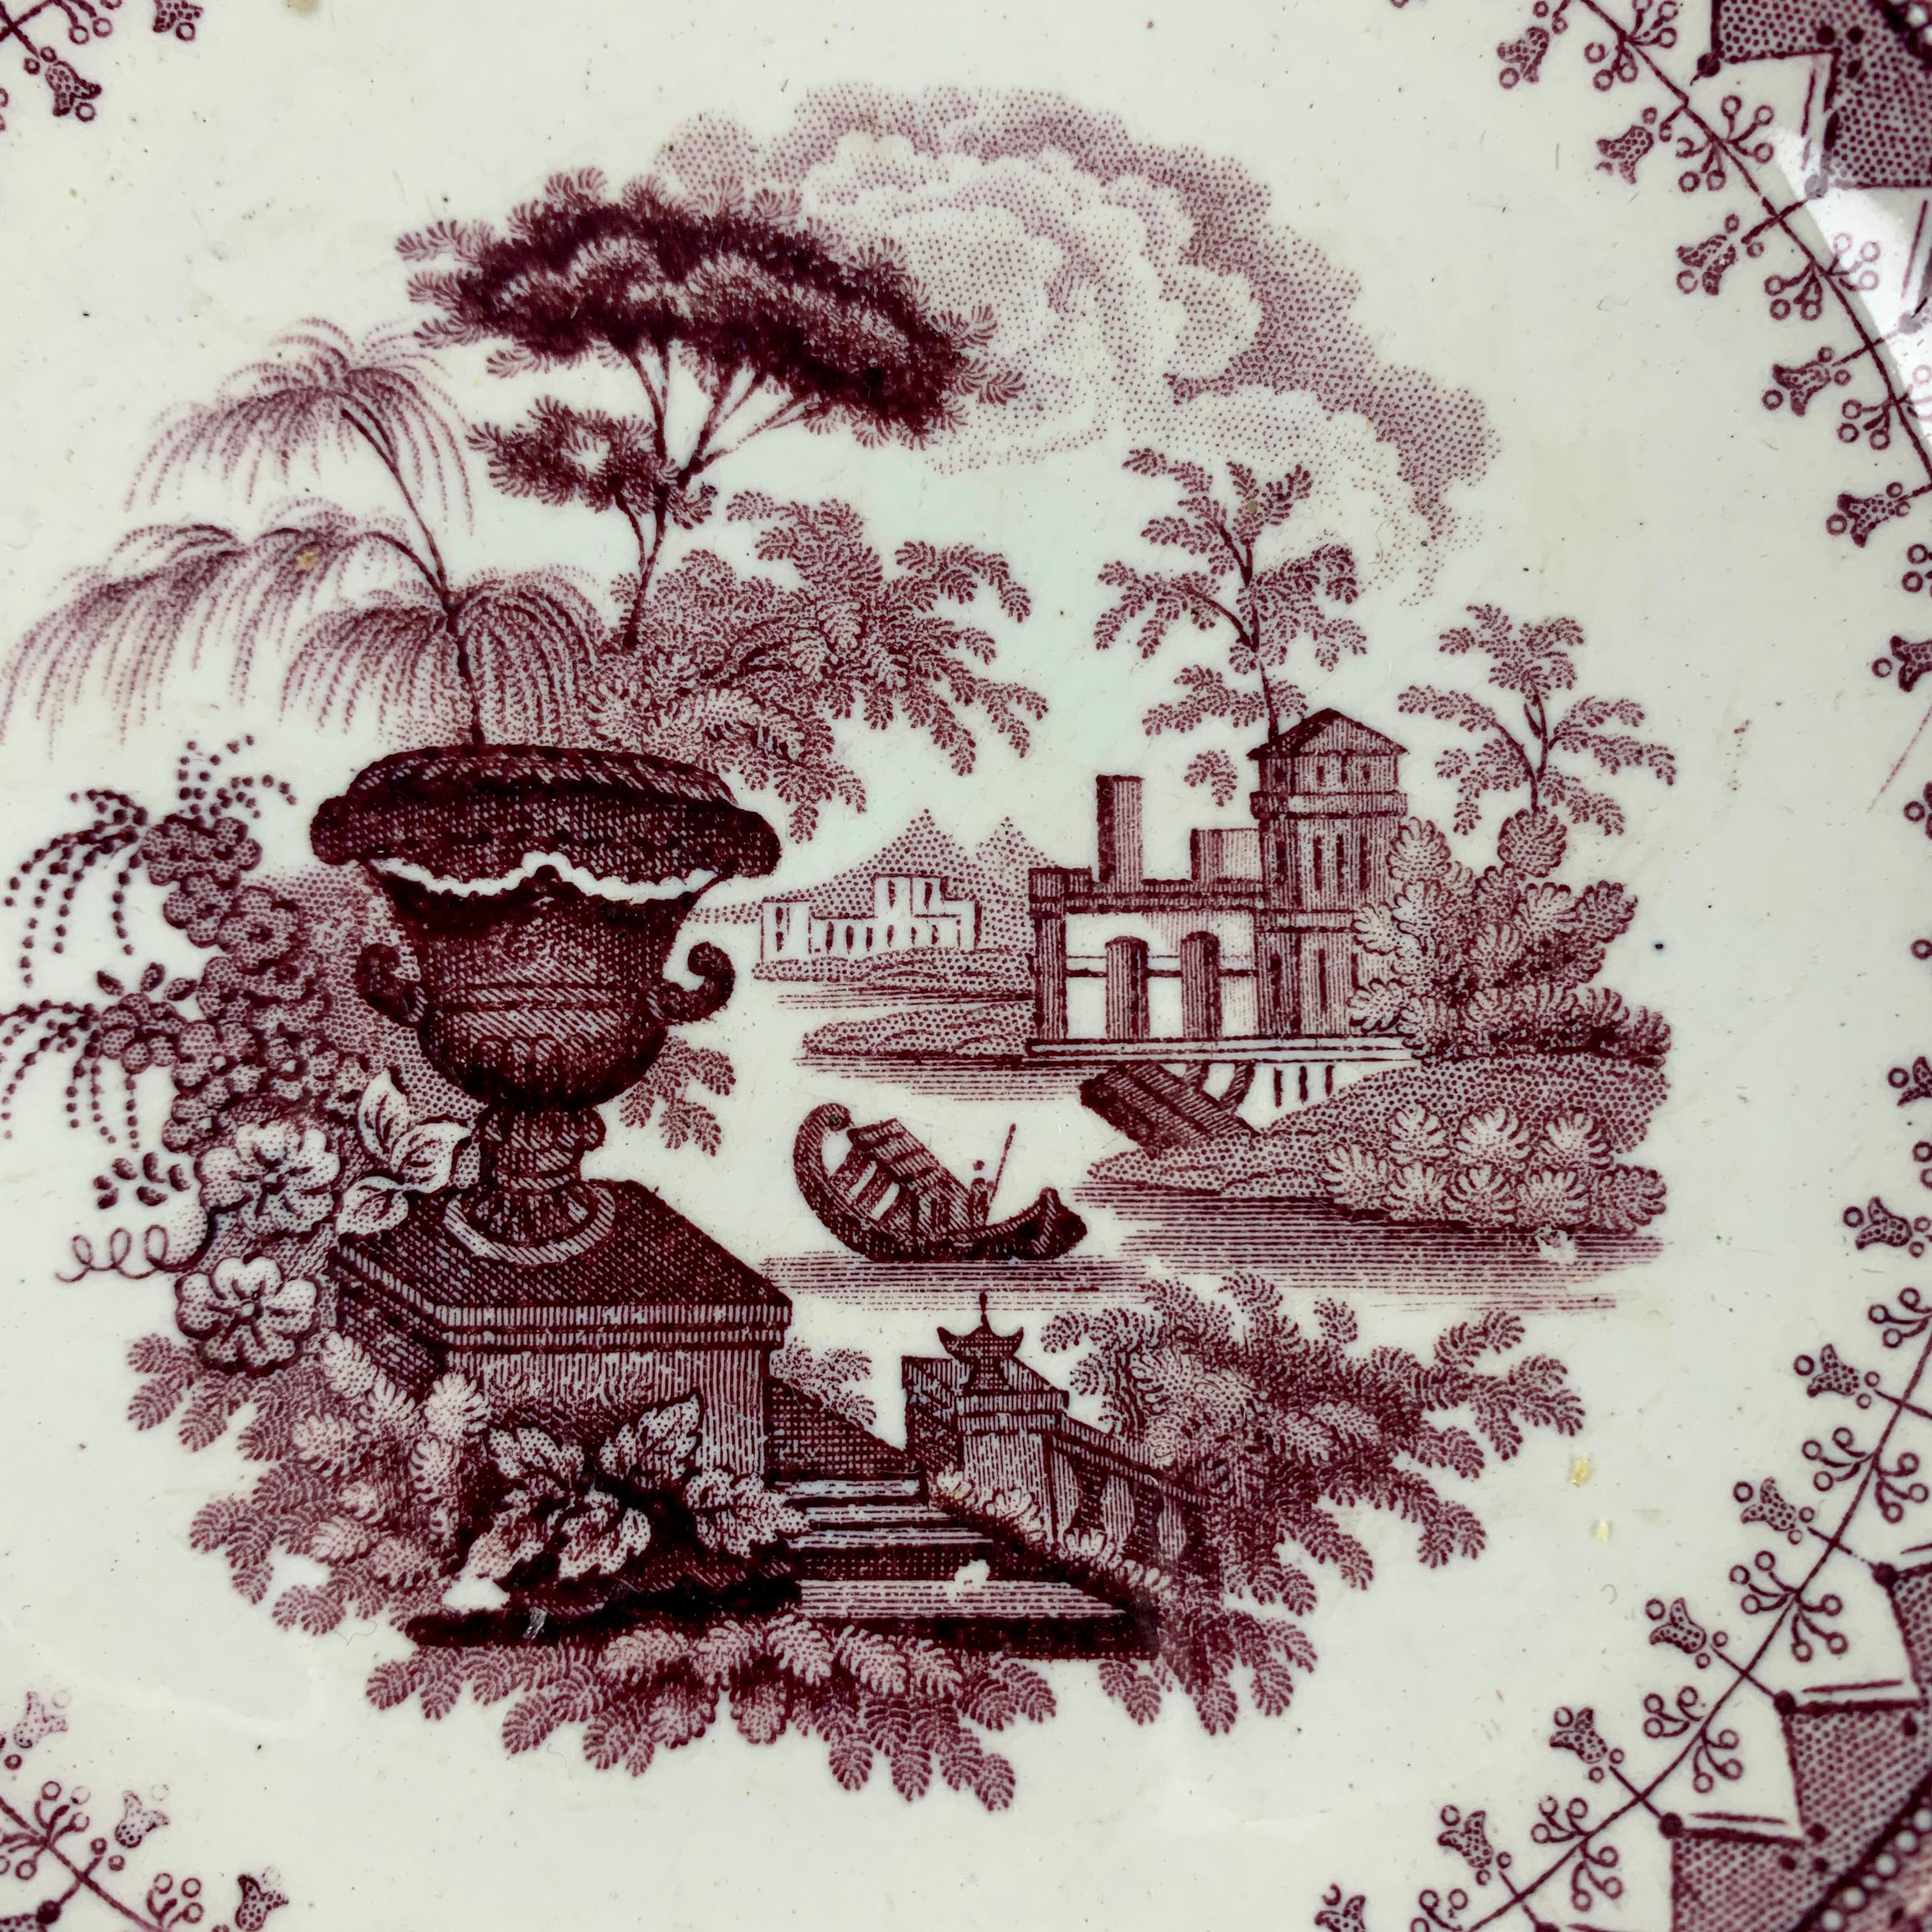 From Thomas Mayer, an earthenware purple transfer printed plate in the Canova pattern, Stoke-on-Trent, Staffordshire, circa 1826-1838.

A classical romantic central image, showing a large urn in the foreground, with a Gondola, buildings, and